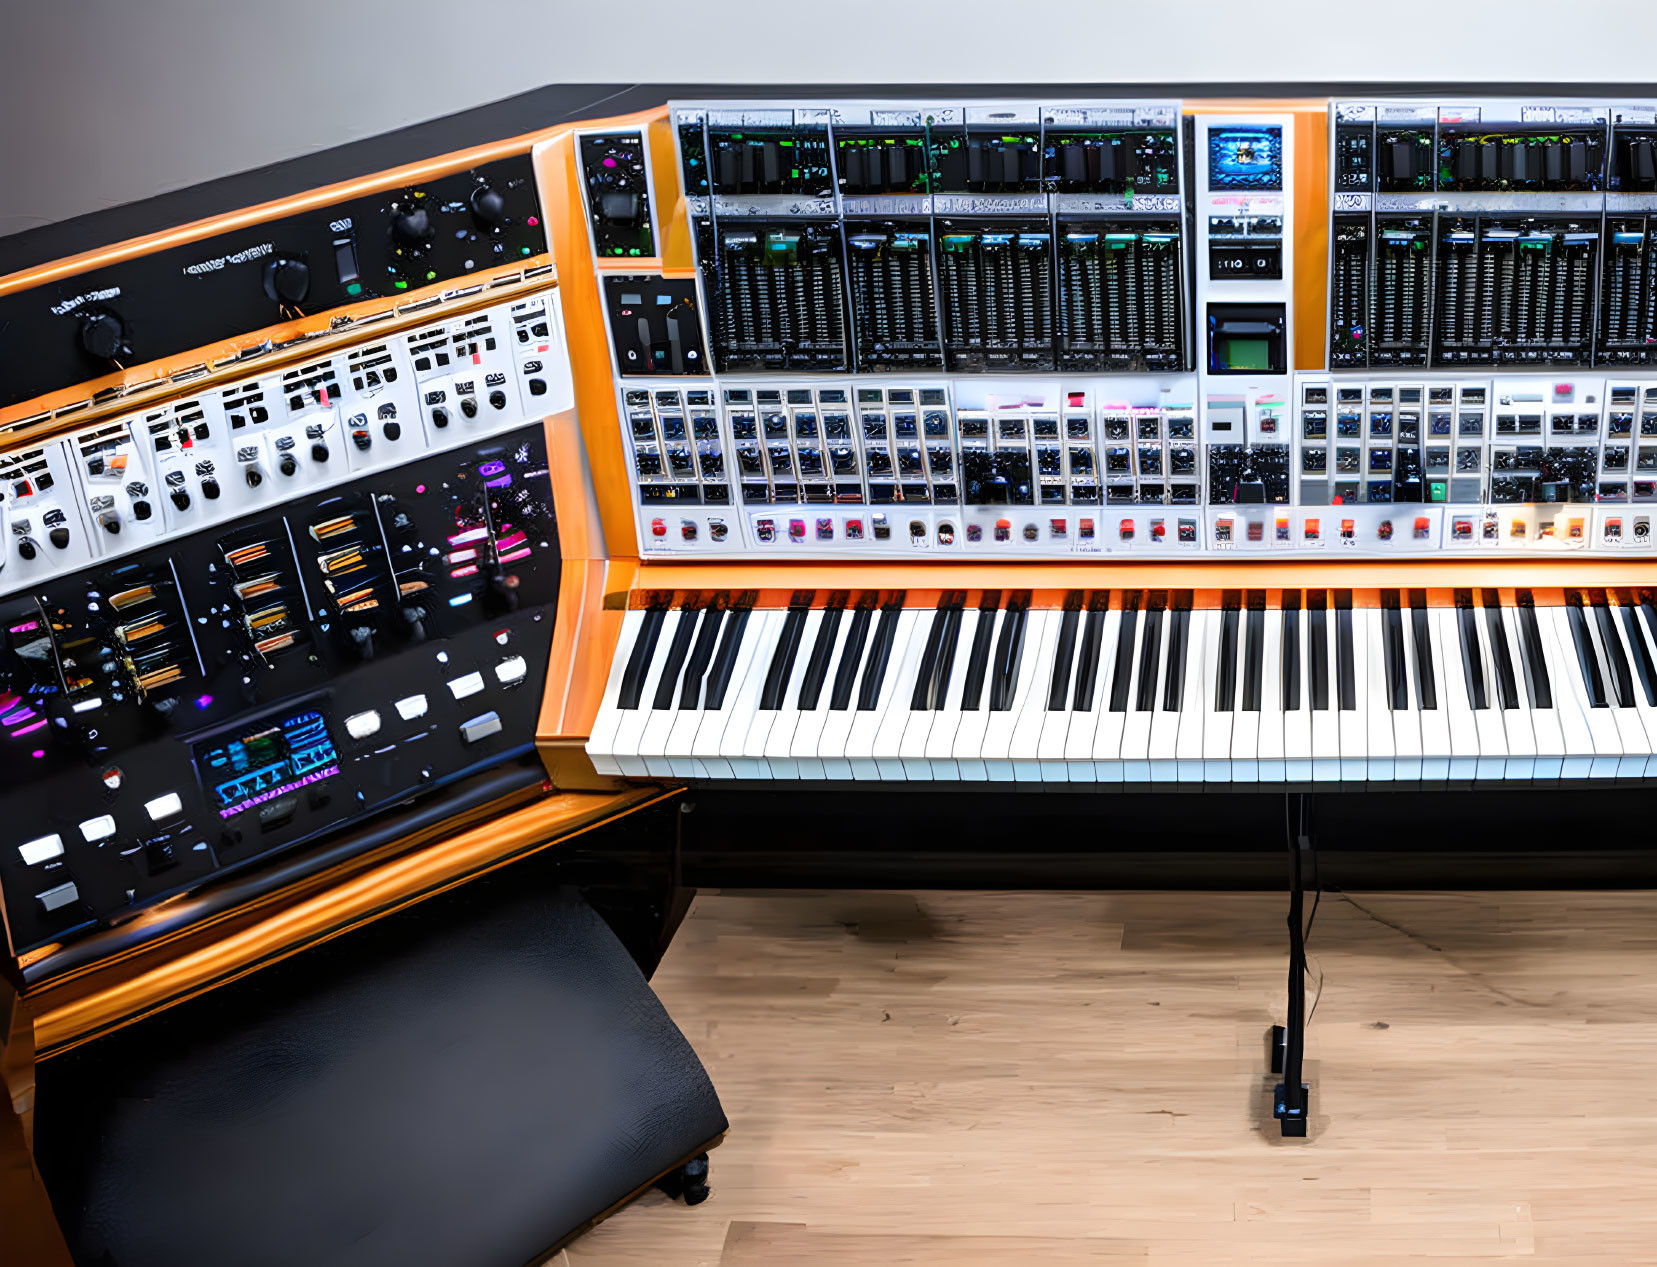 Studio setup with synthesizer, keyboard, and audio mixing modules